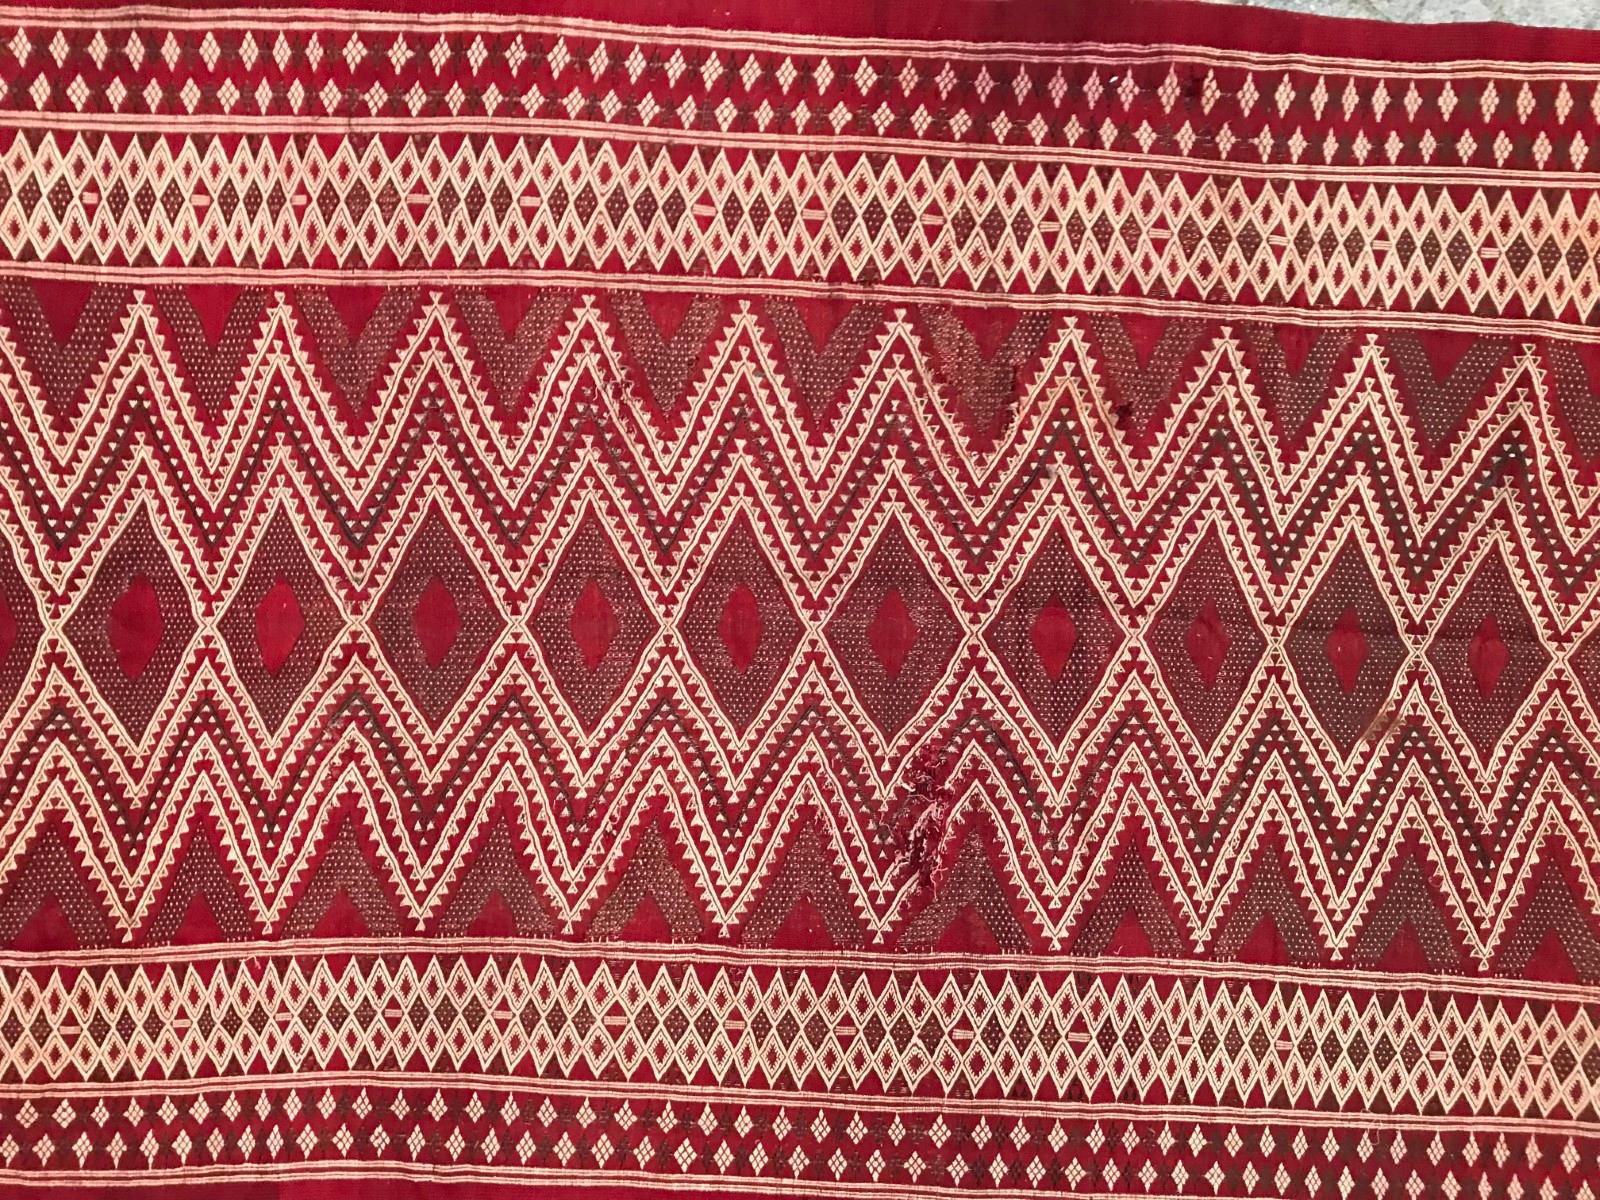 Antique Moroccan Kilim rug with beautiful geometrical and tribal design and nice red field color, entirely handwoven with wool on cotton foundation. Measures: 5.24 x 9.12 feet.